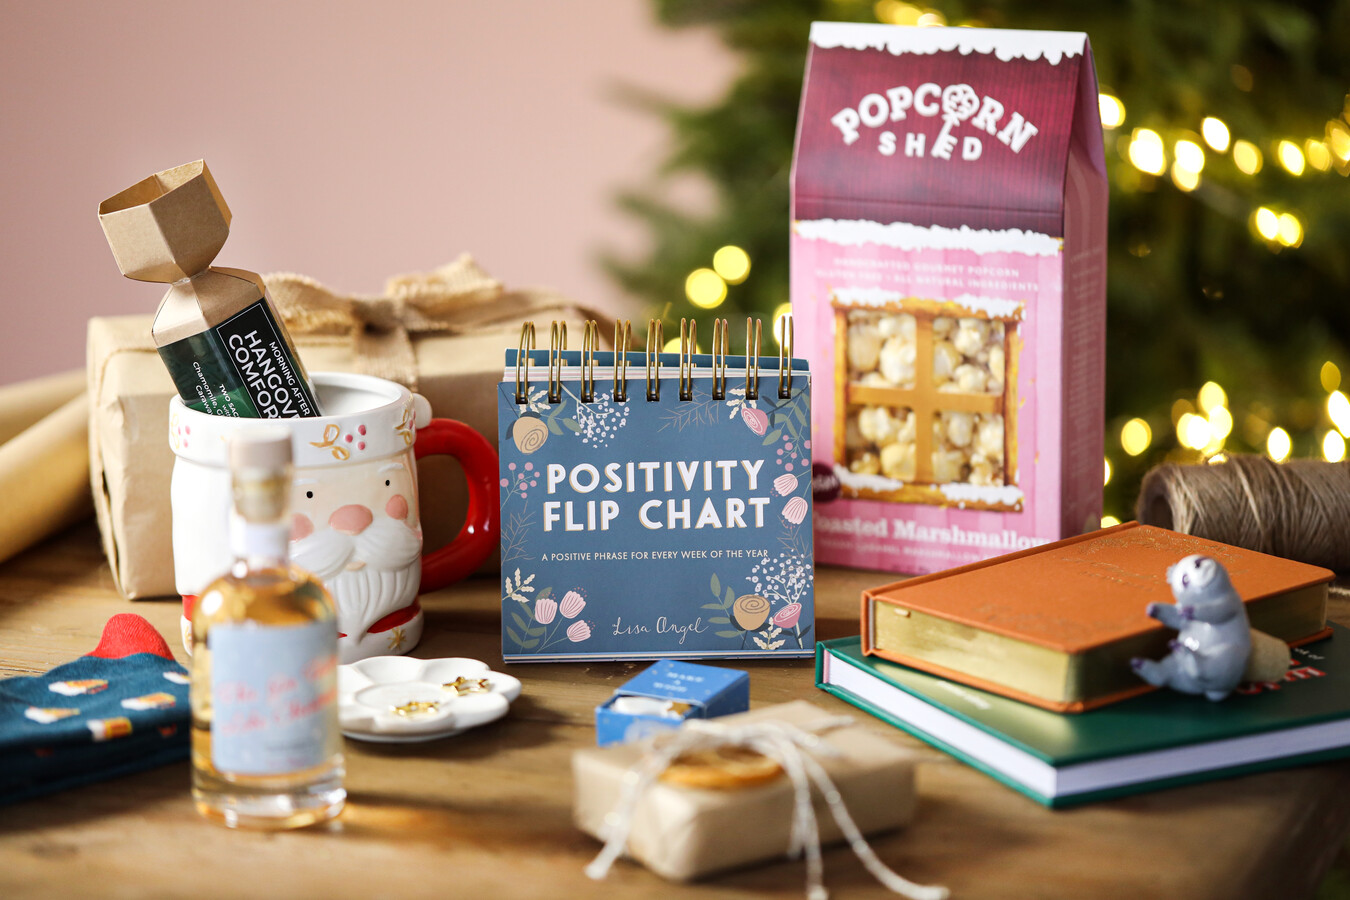 Top 15 Secret Santa gifts laid out on wooden table with lit Christmas tree in background